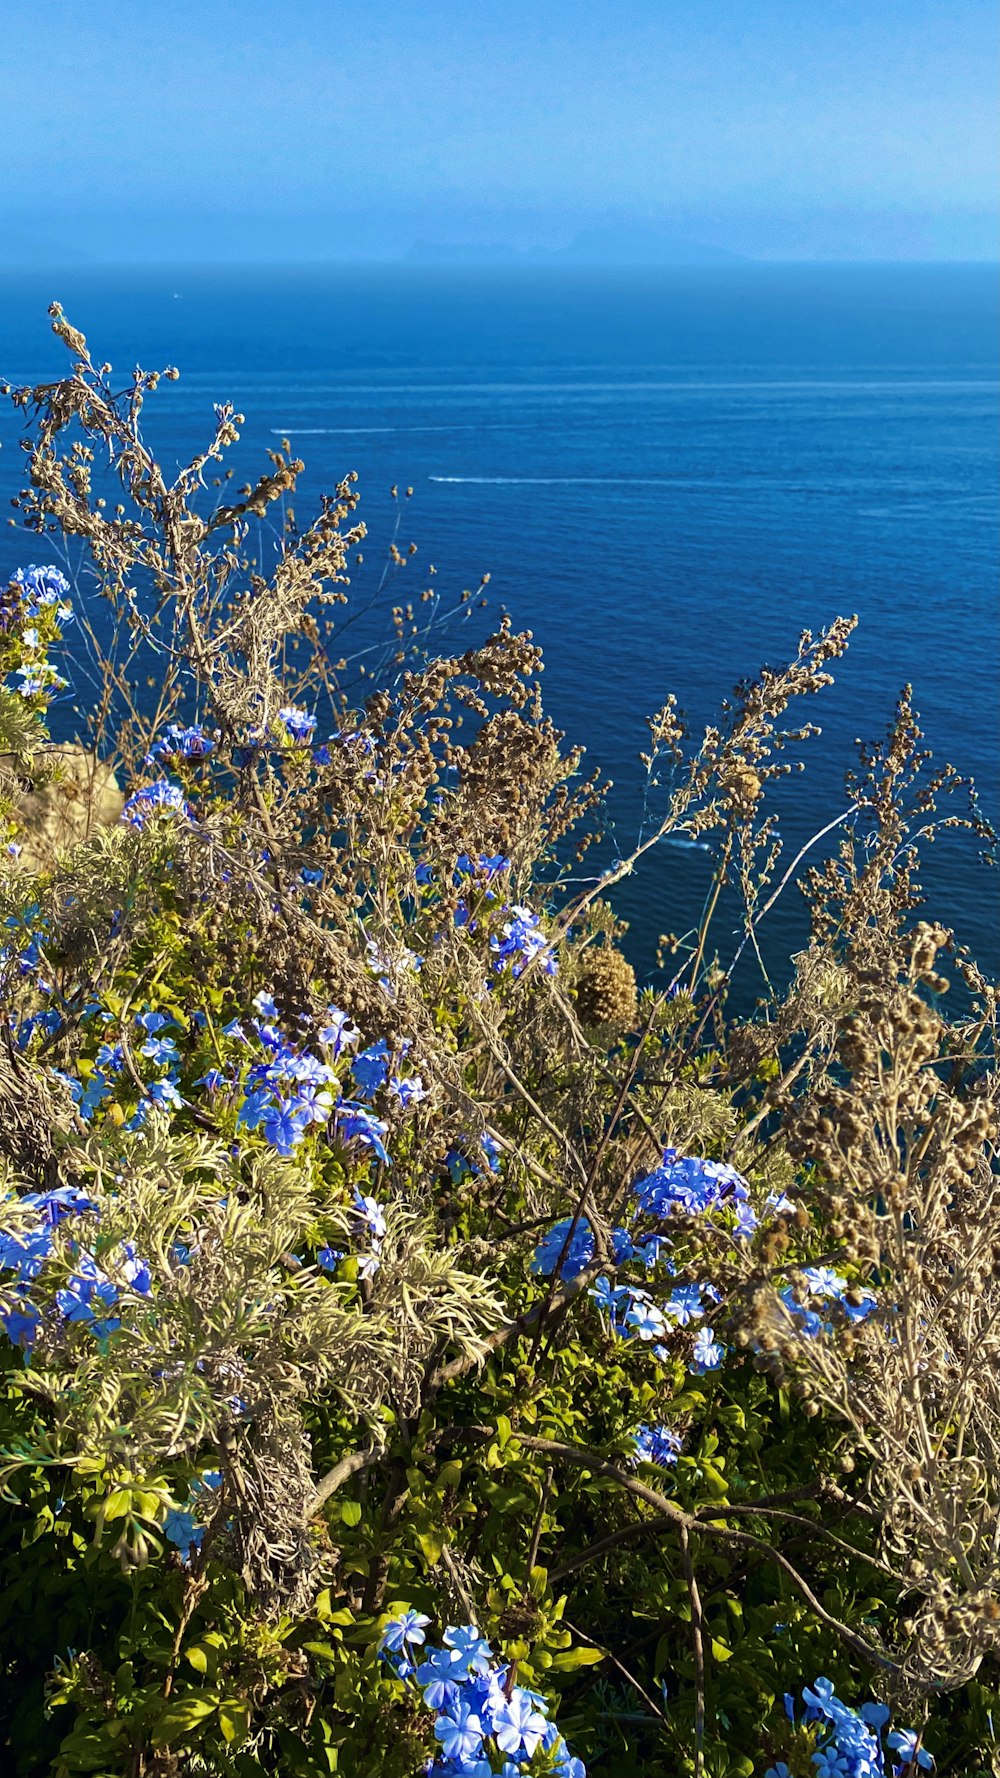 blue flowers beside body of water during daytime